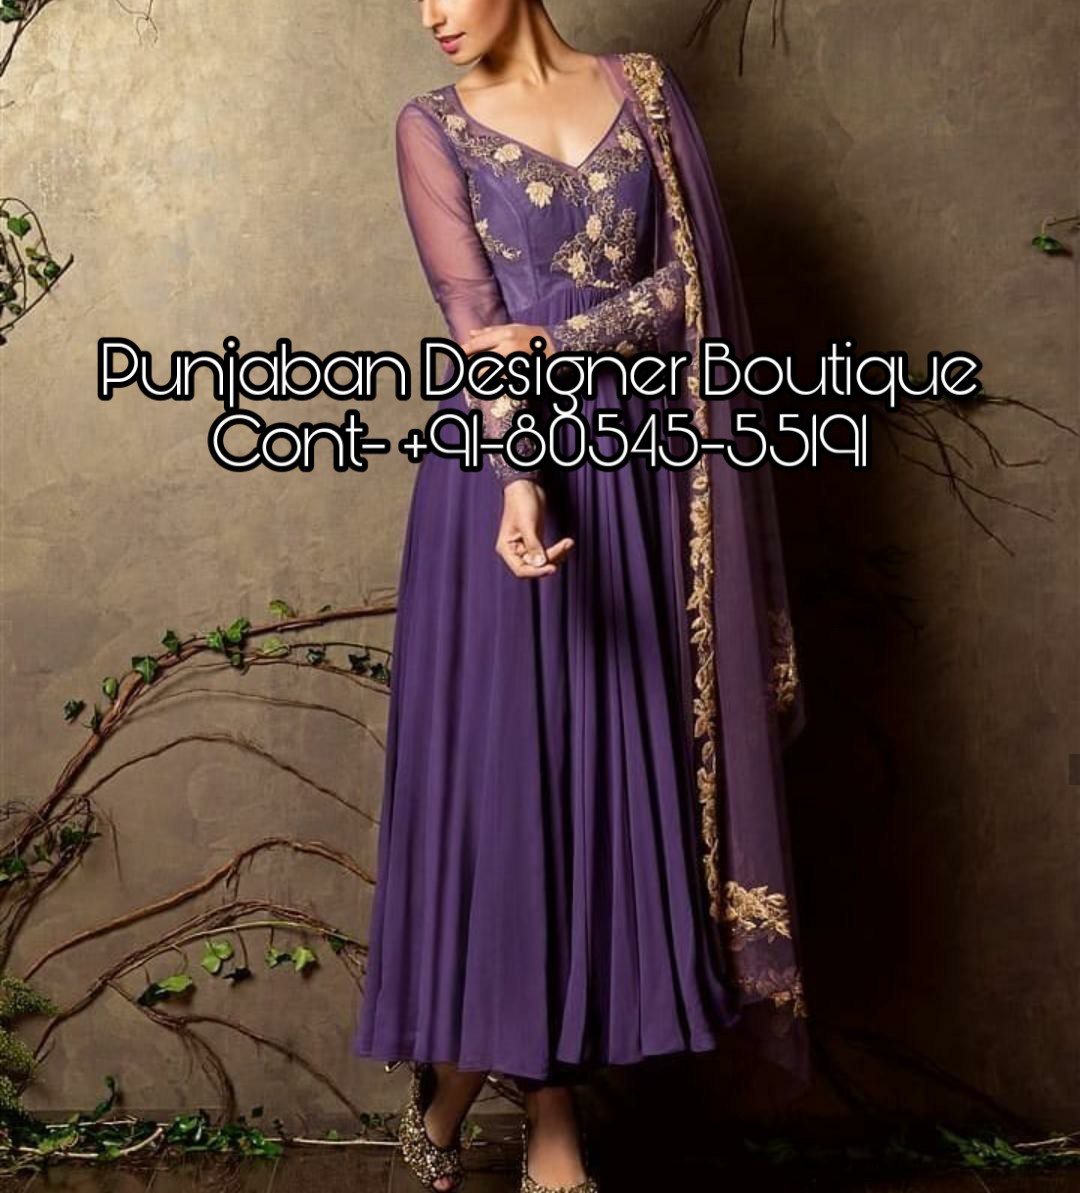 Latest Frock Suits For Wedding With Price  Maharani Designer Boutique